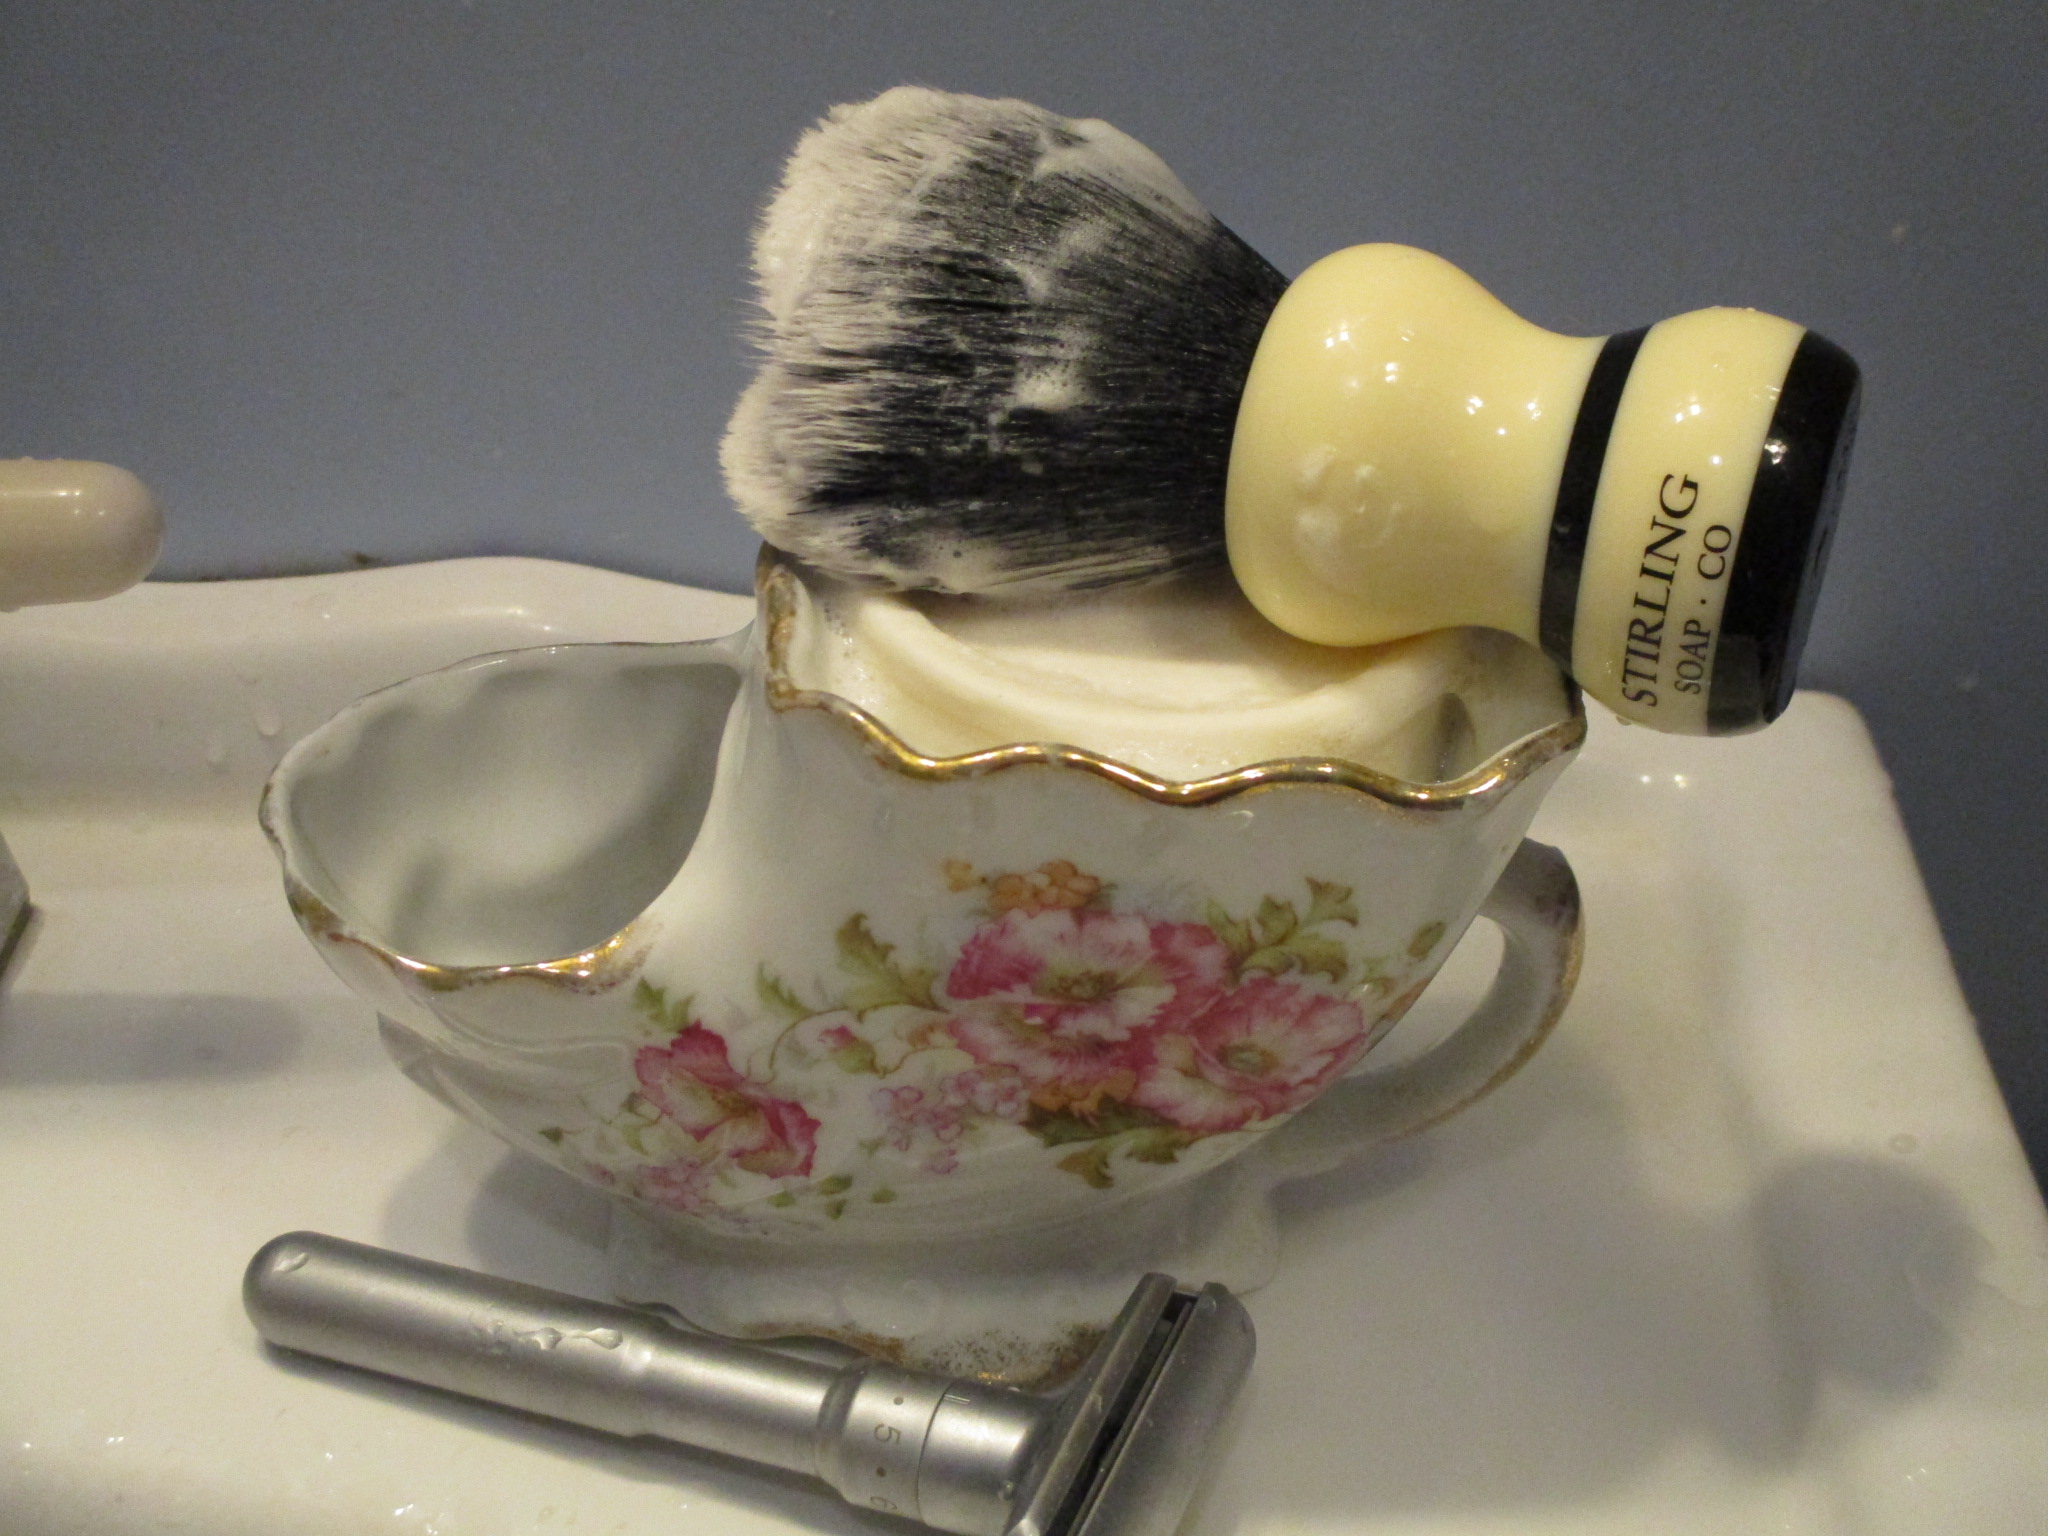 My great-grandfather's scuttle, with Williams soap, Stirling brush, and QShave adjustable razor